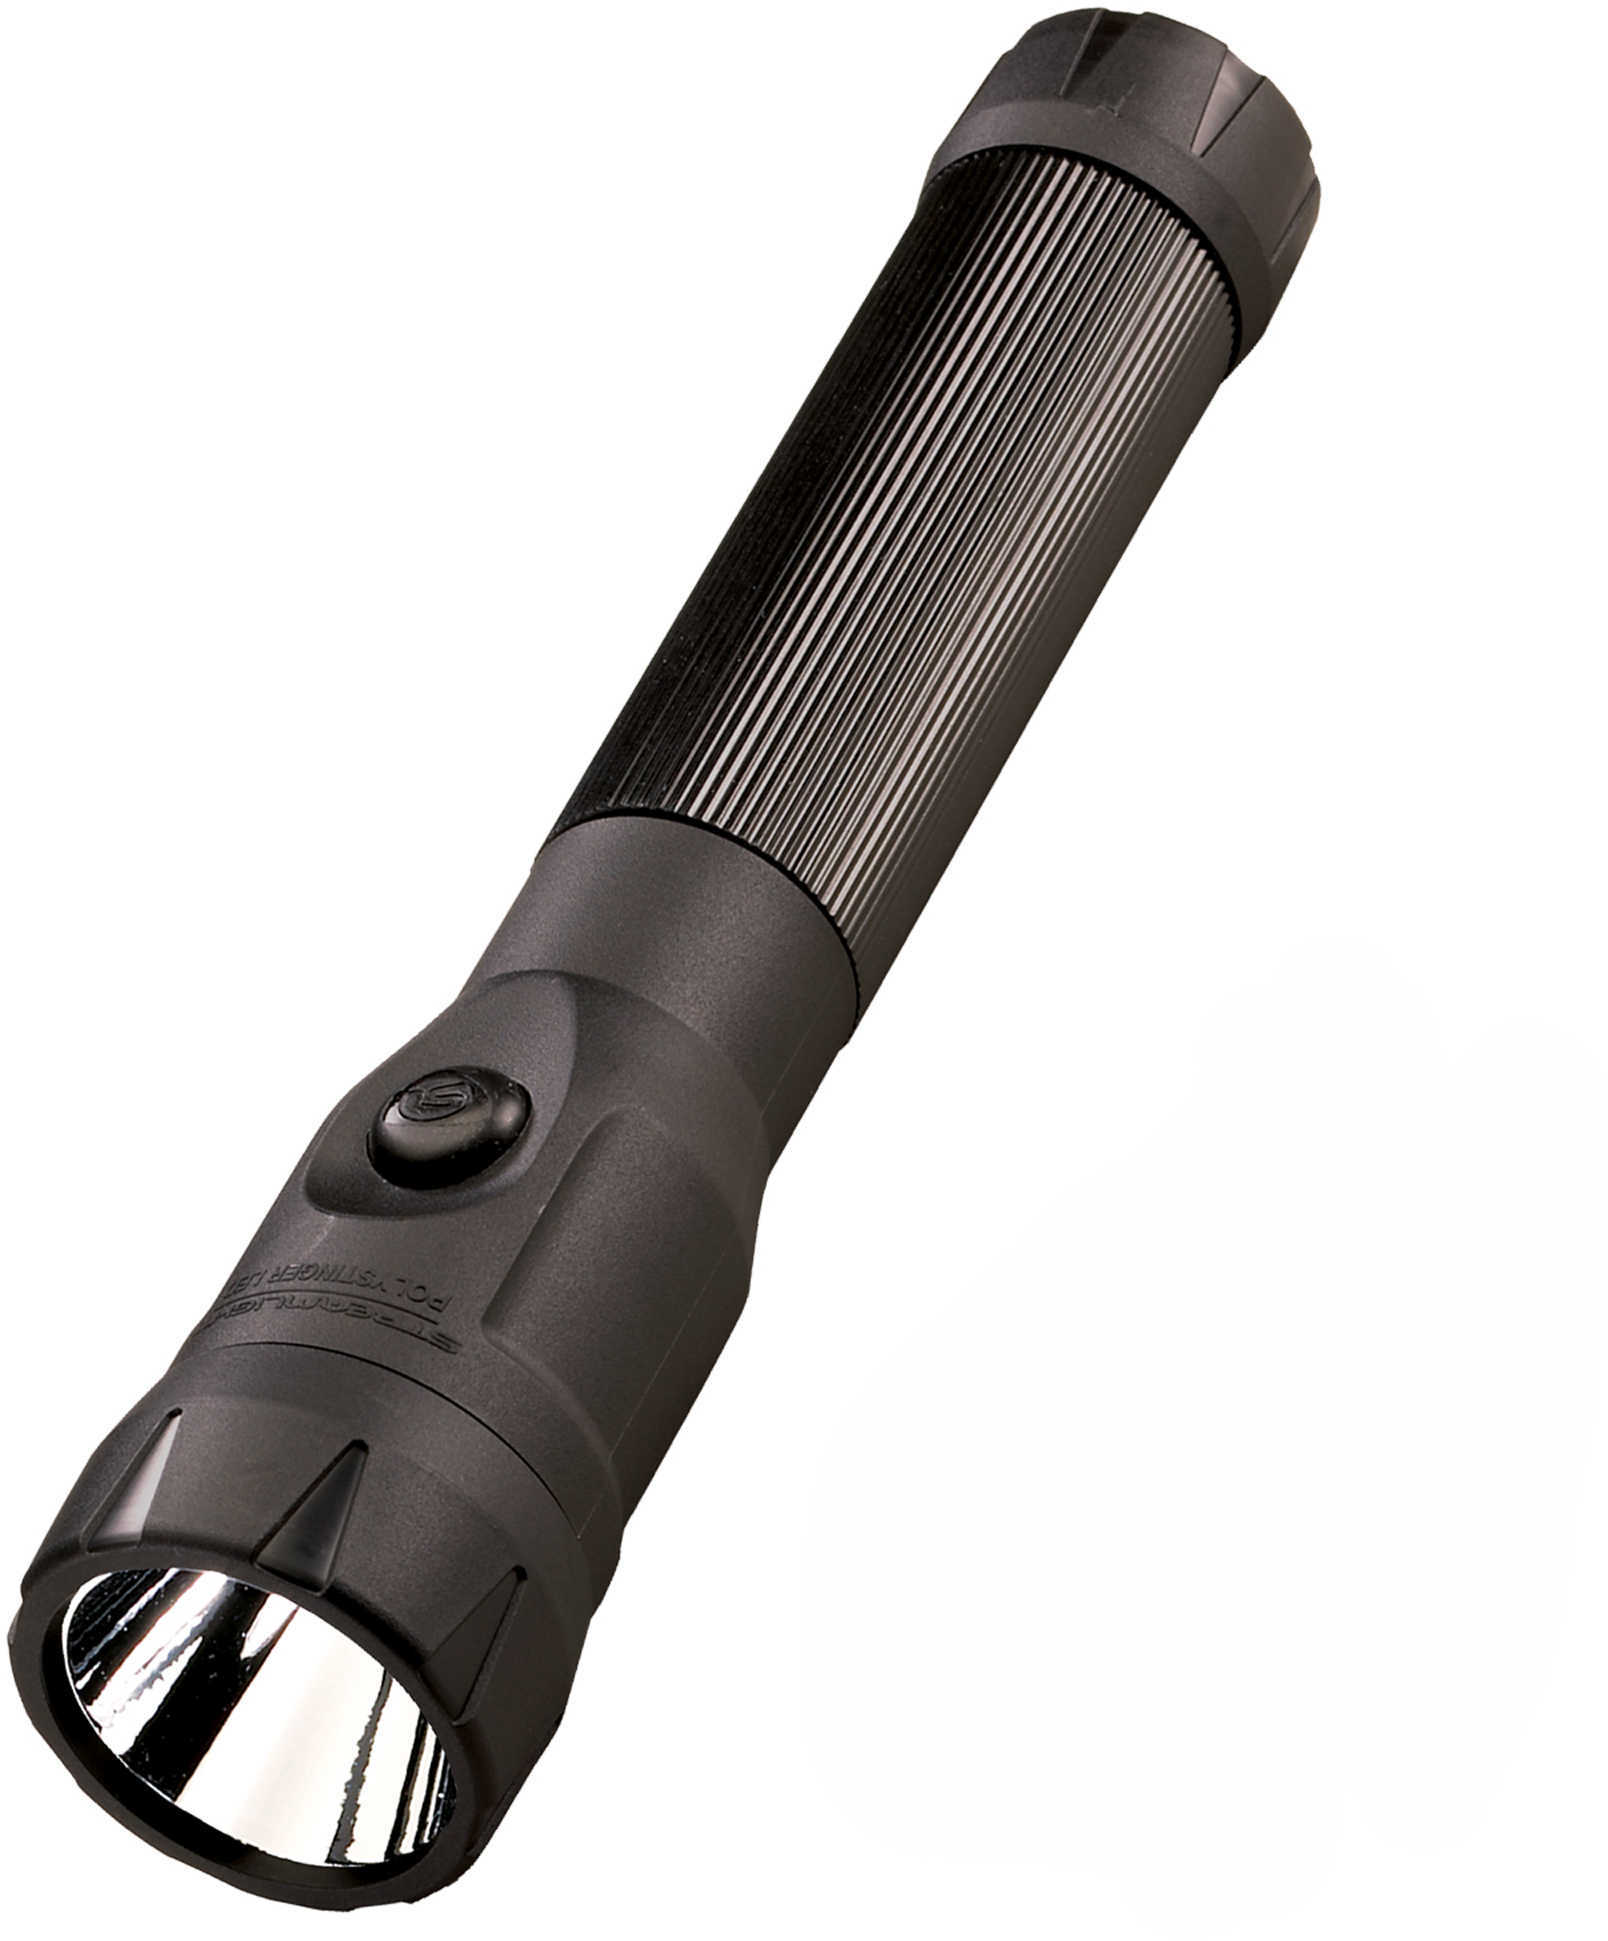 Streamlight 76111 PolyStinger LED Rechargeable Flashlight w/AC Charger Black